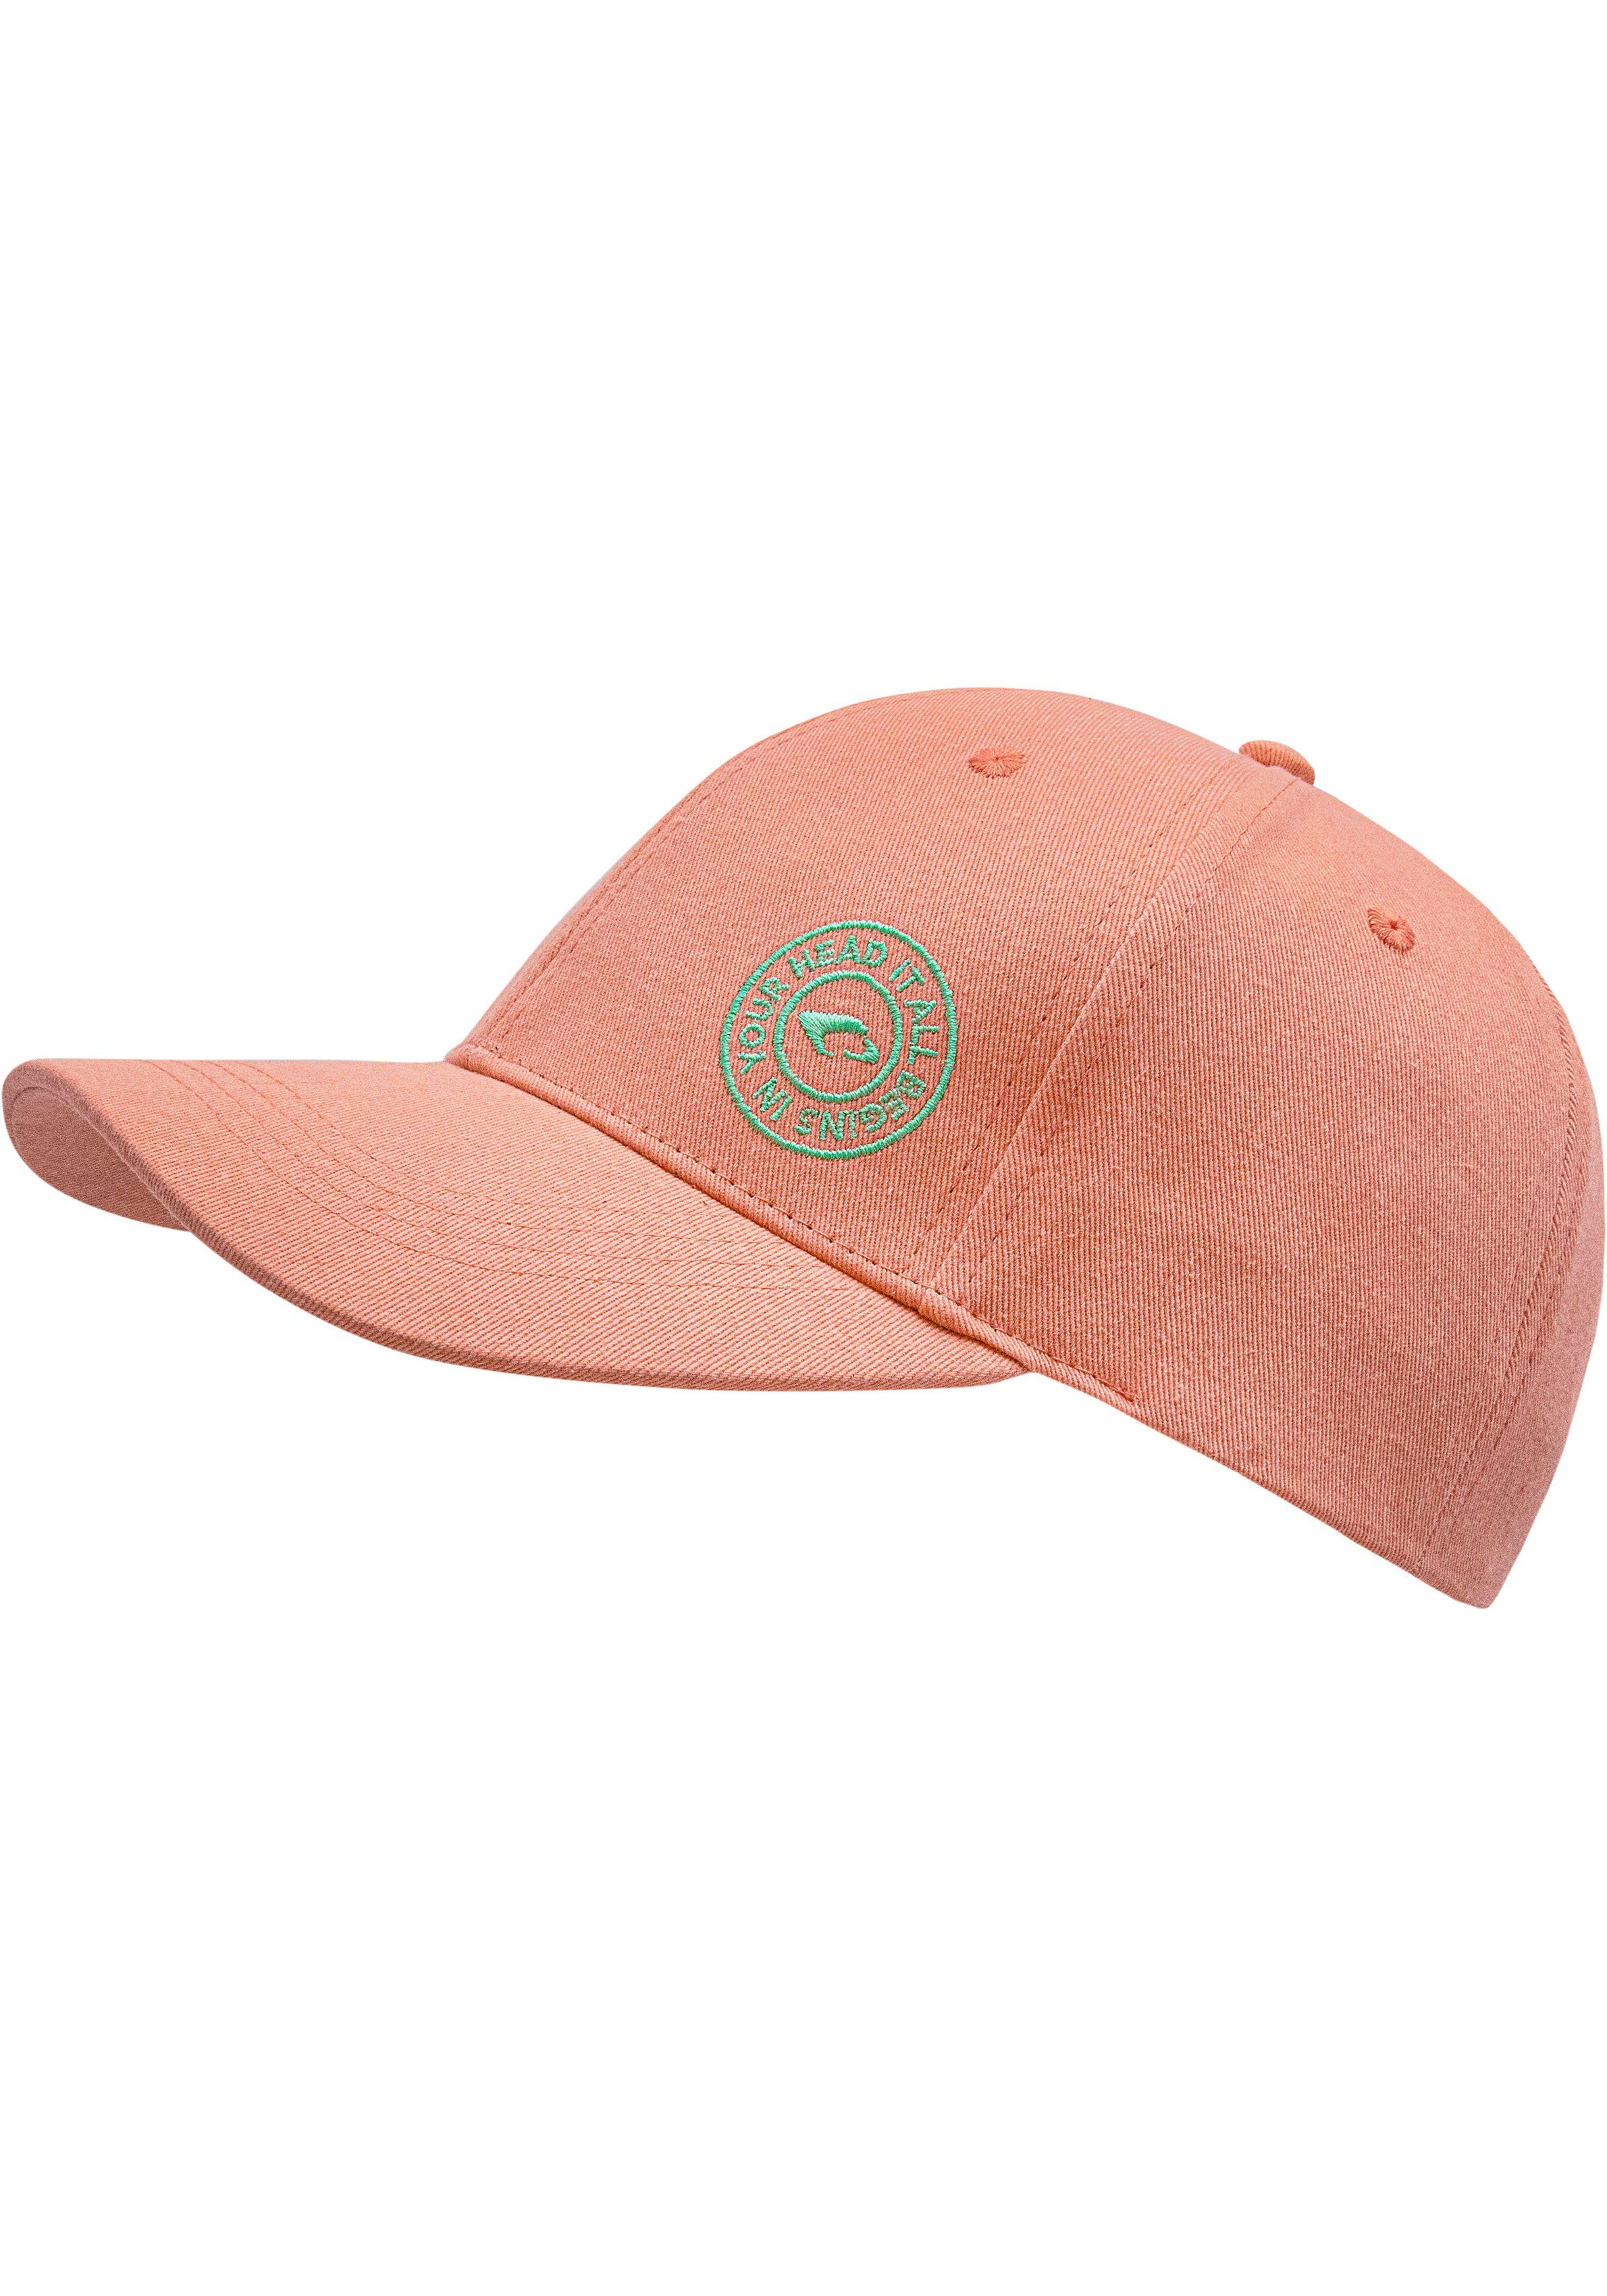 chillouts Baseball Arklow Hat coral Cap